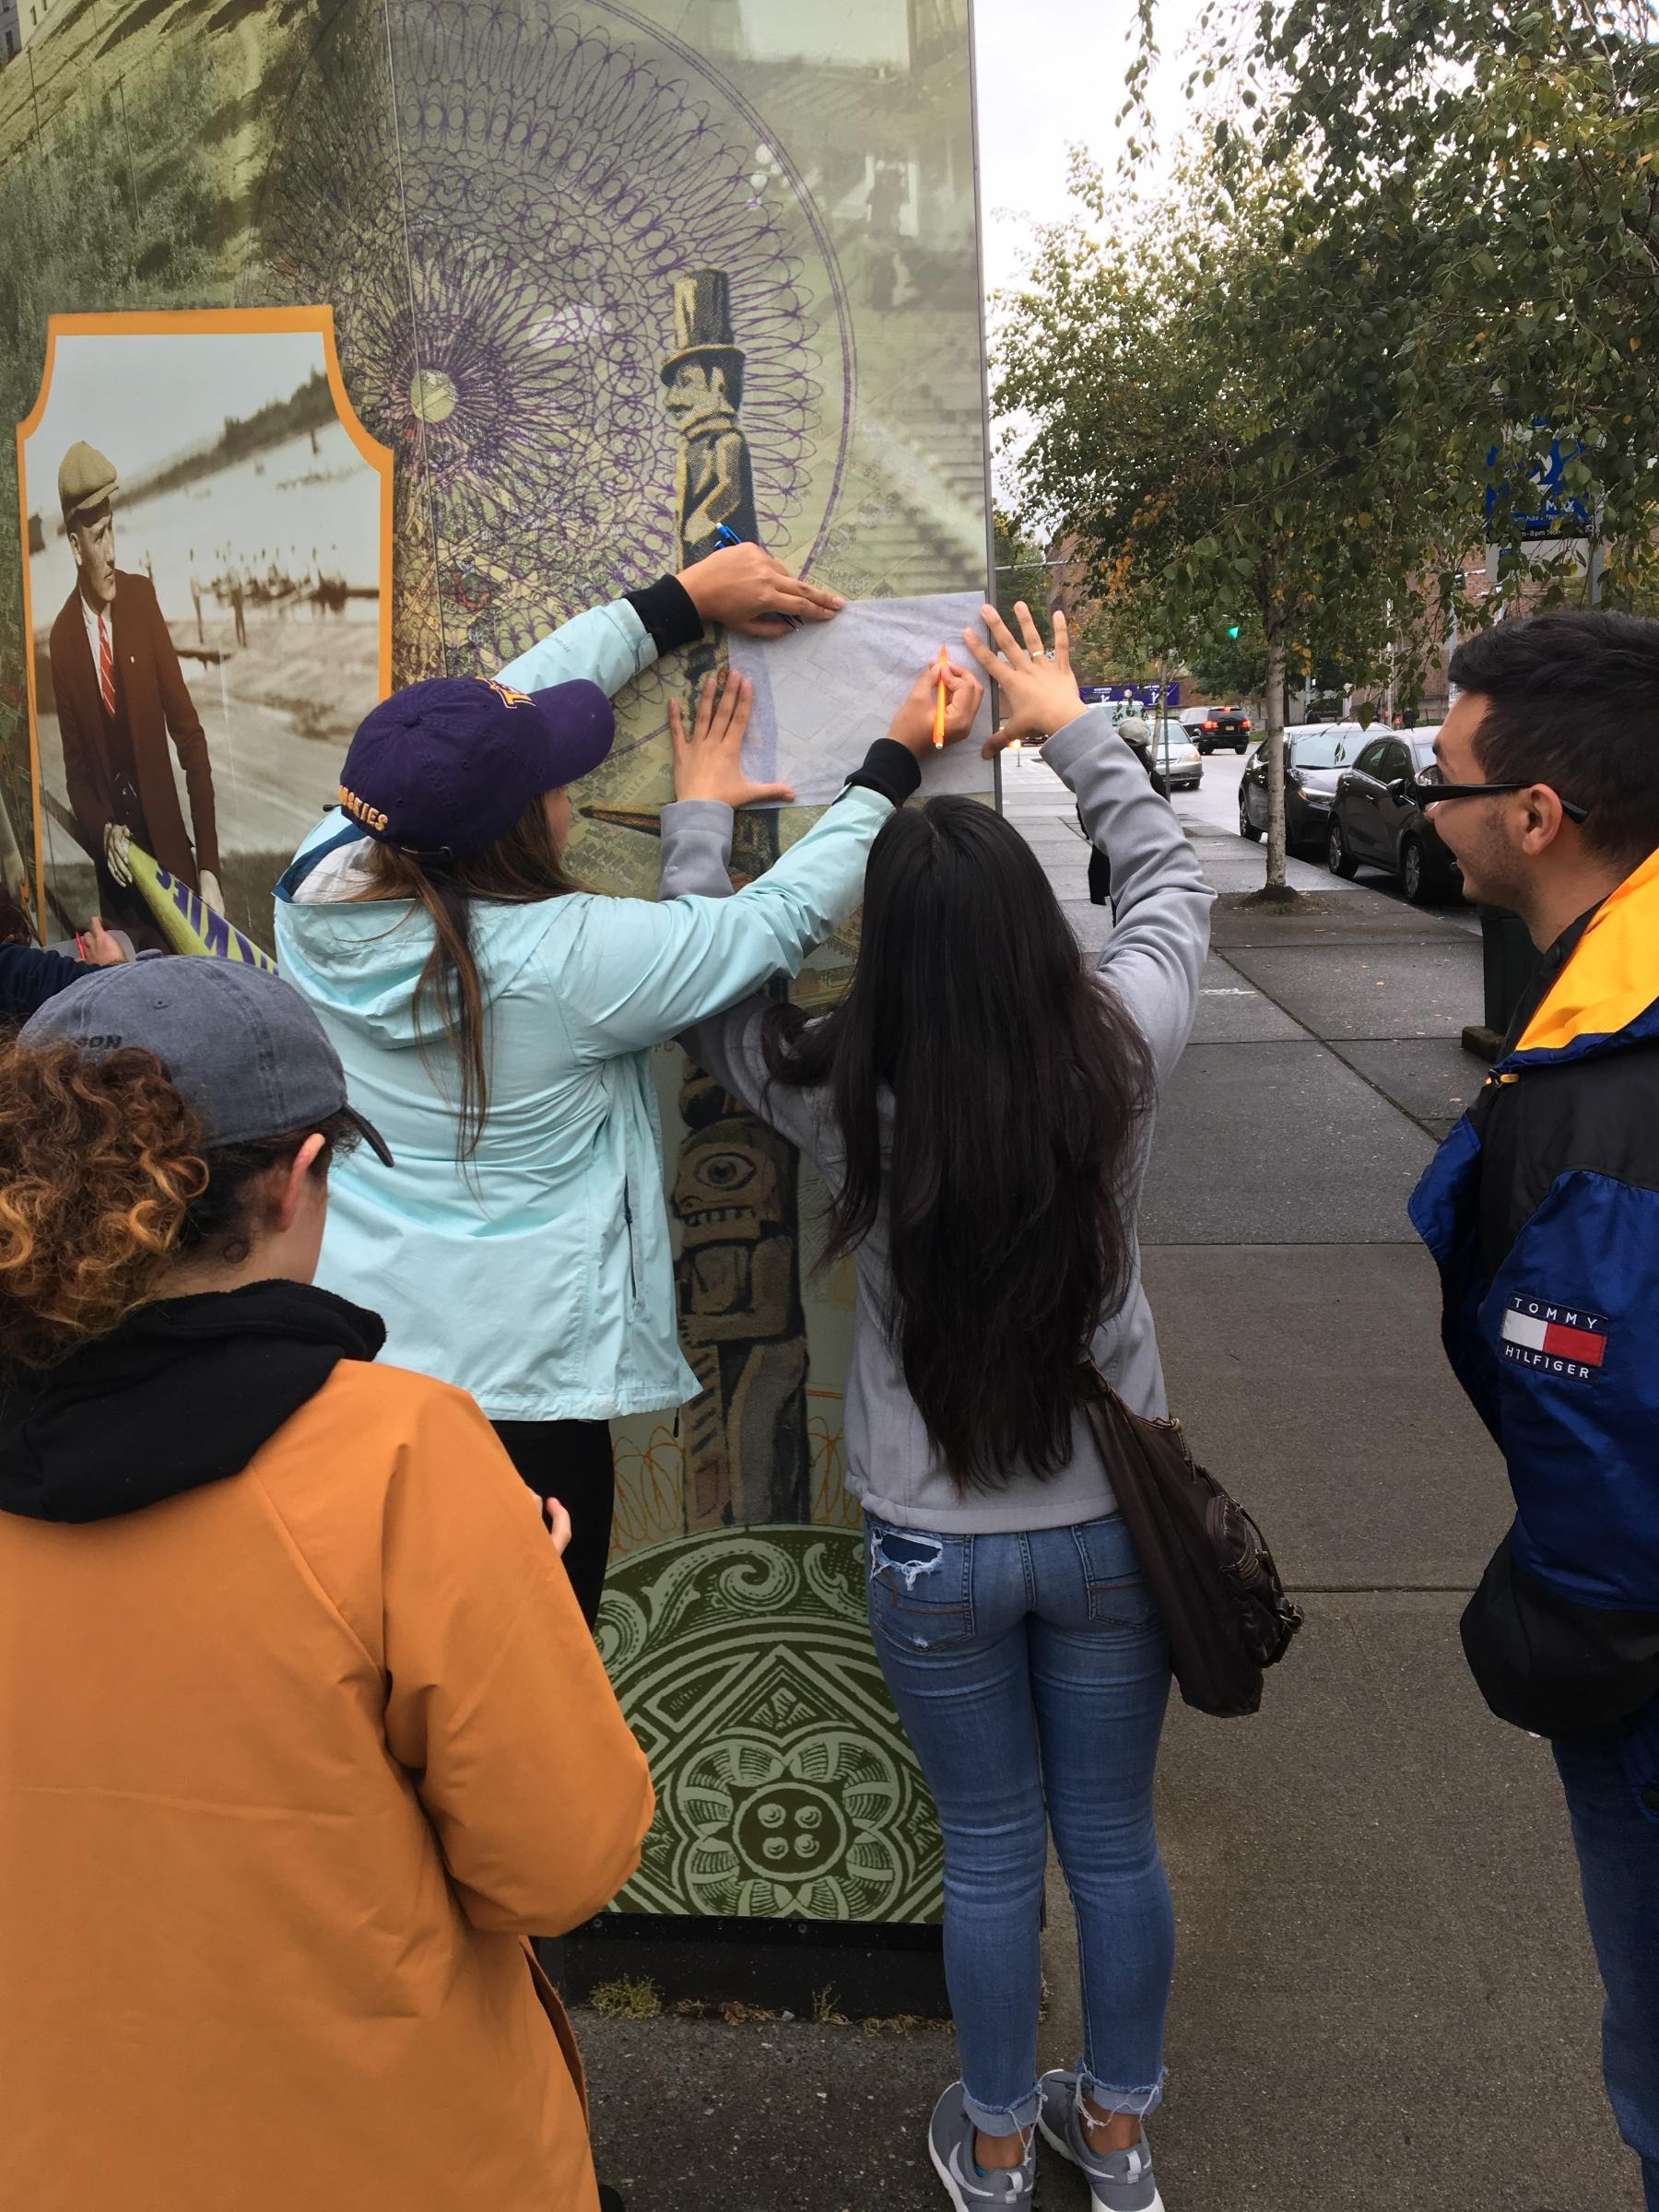 University of Washington students moving between city spaces and digital maps to learn about the role of BIPOC residents in Seattle's development through a curriculum called Mobile City Science. Photo Credit: UW Katie Headrick Taylor.